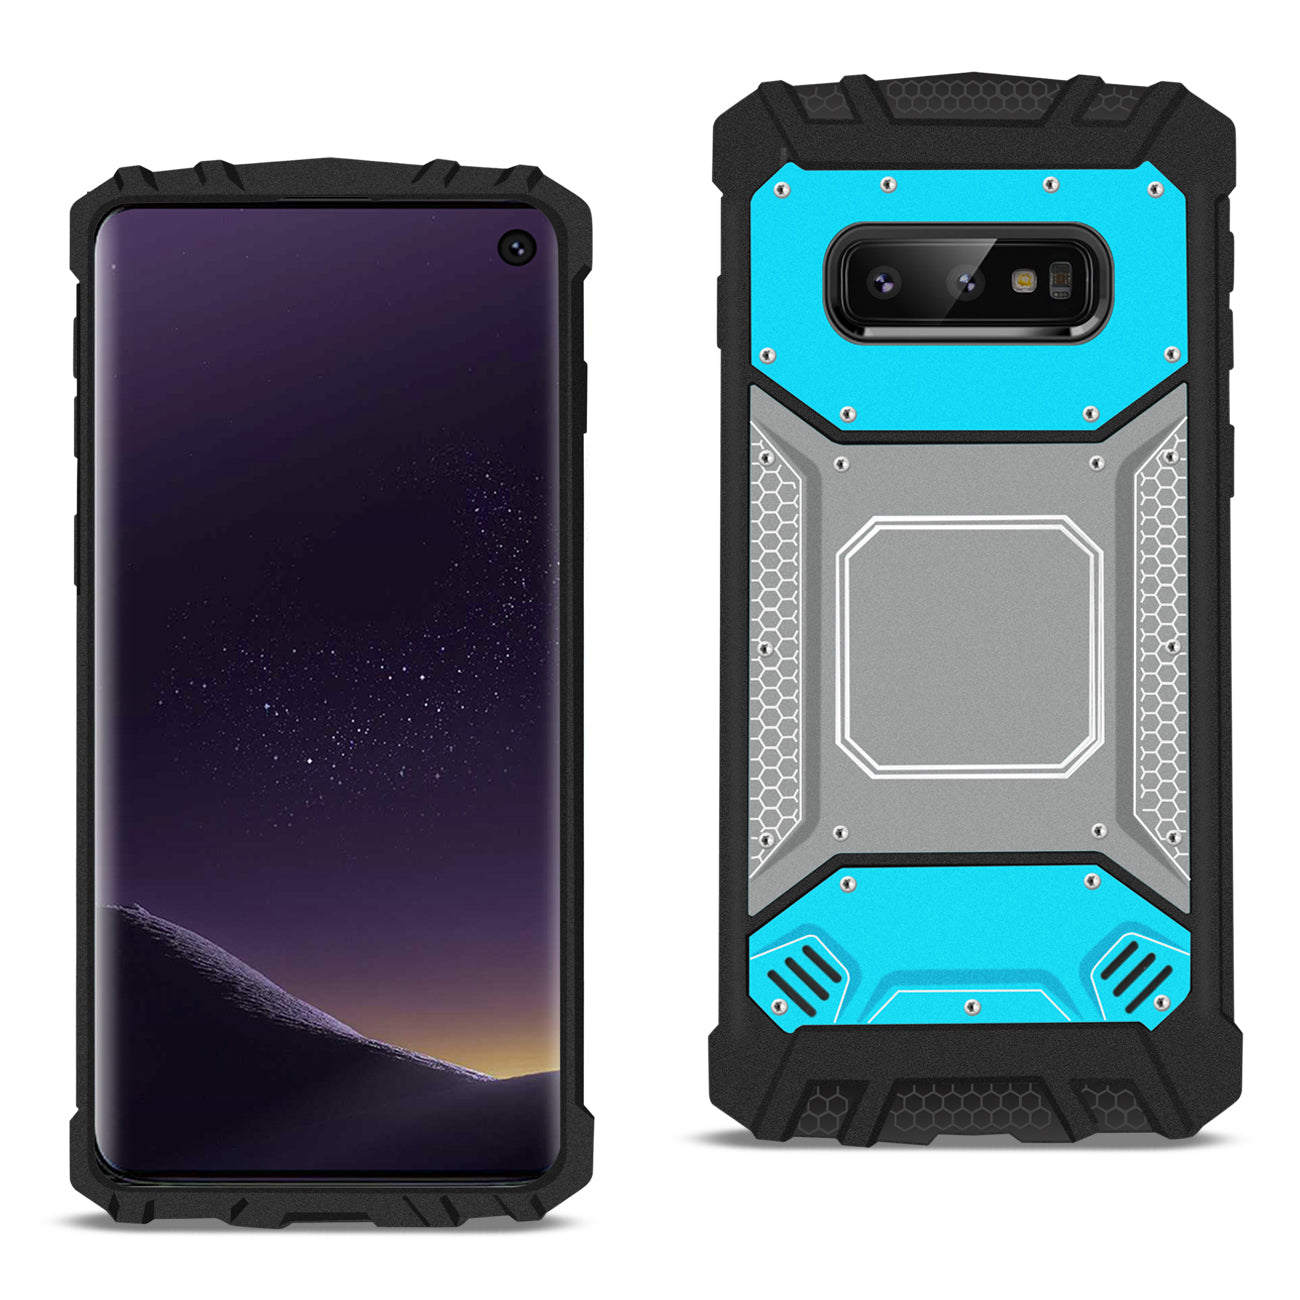 SAMSUNG GALAXY S10 Lite(S10e) Metallic Front Cover Case In Blue and Gray